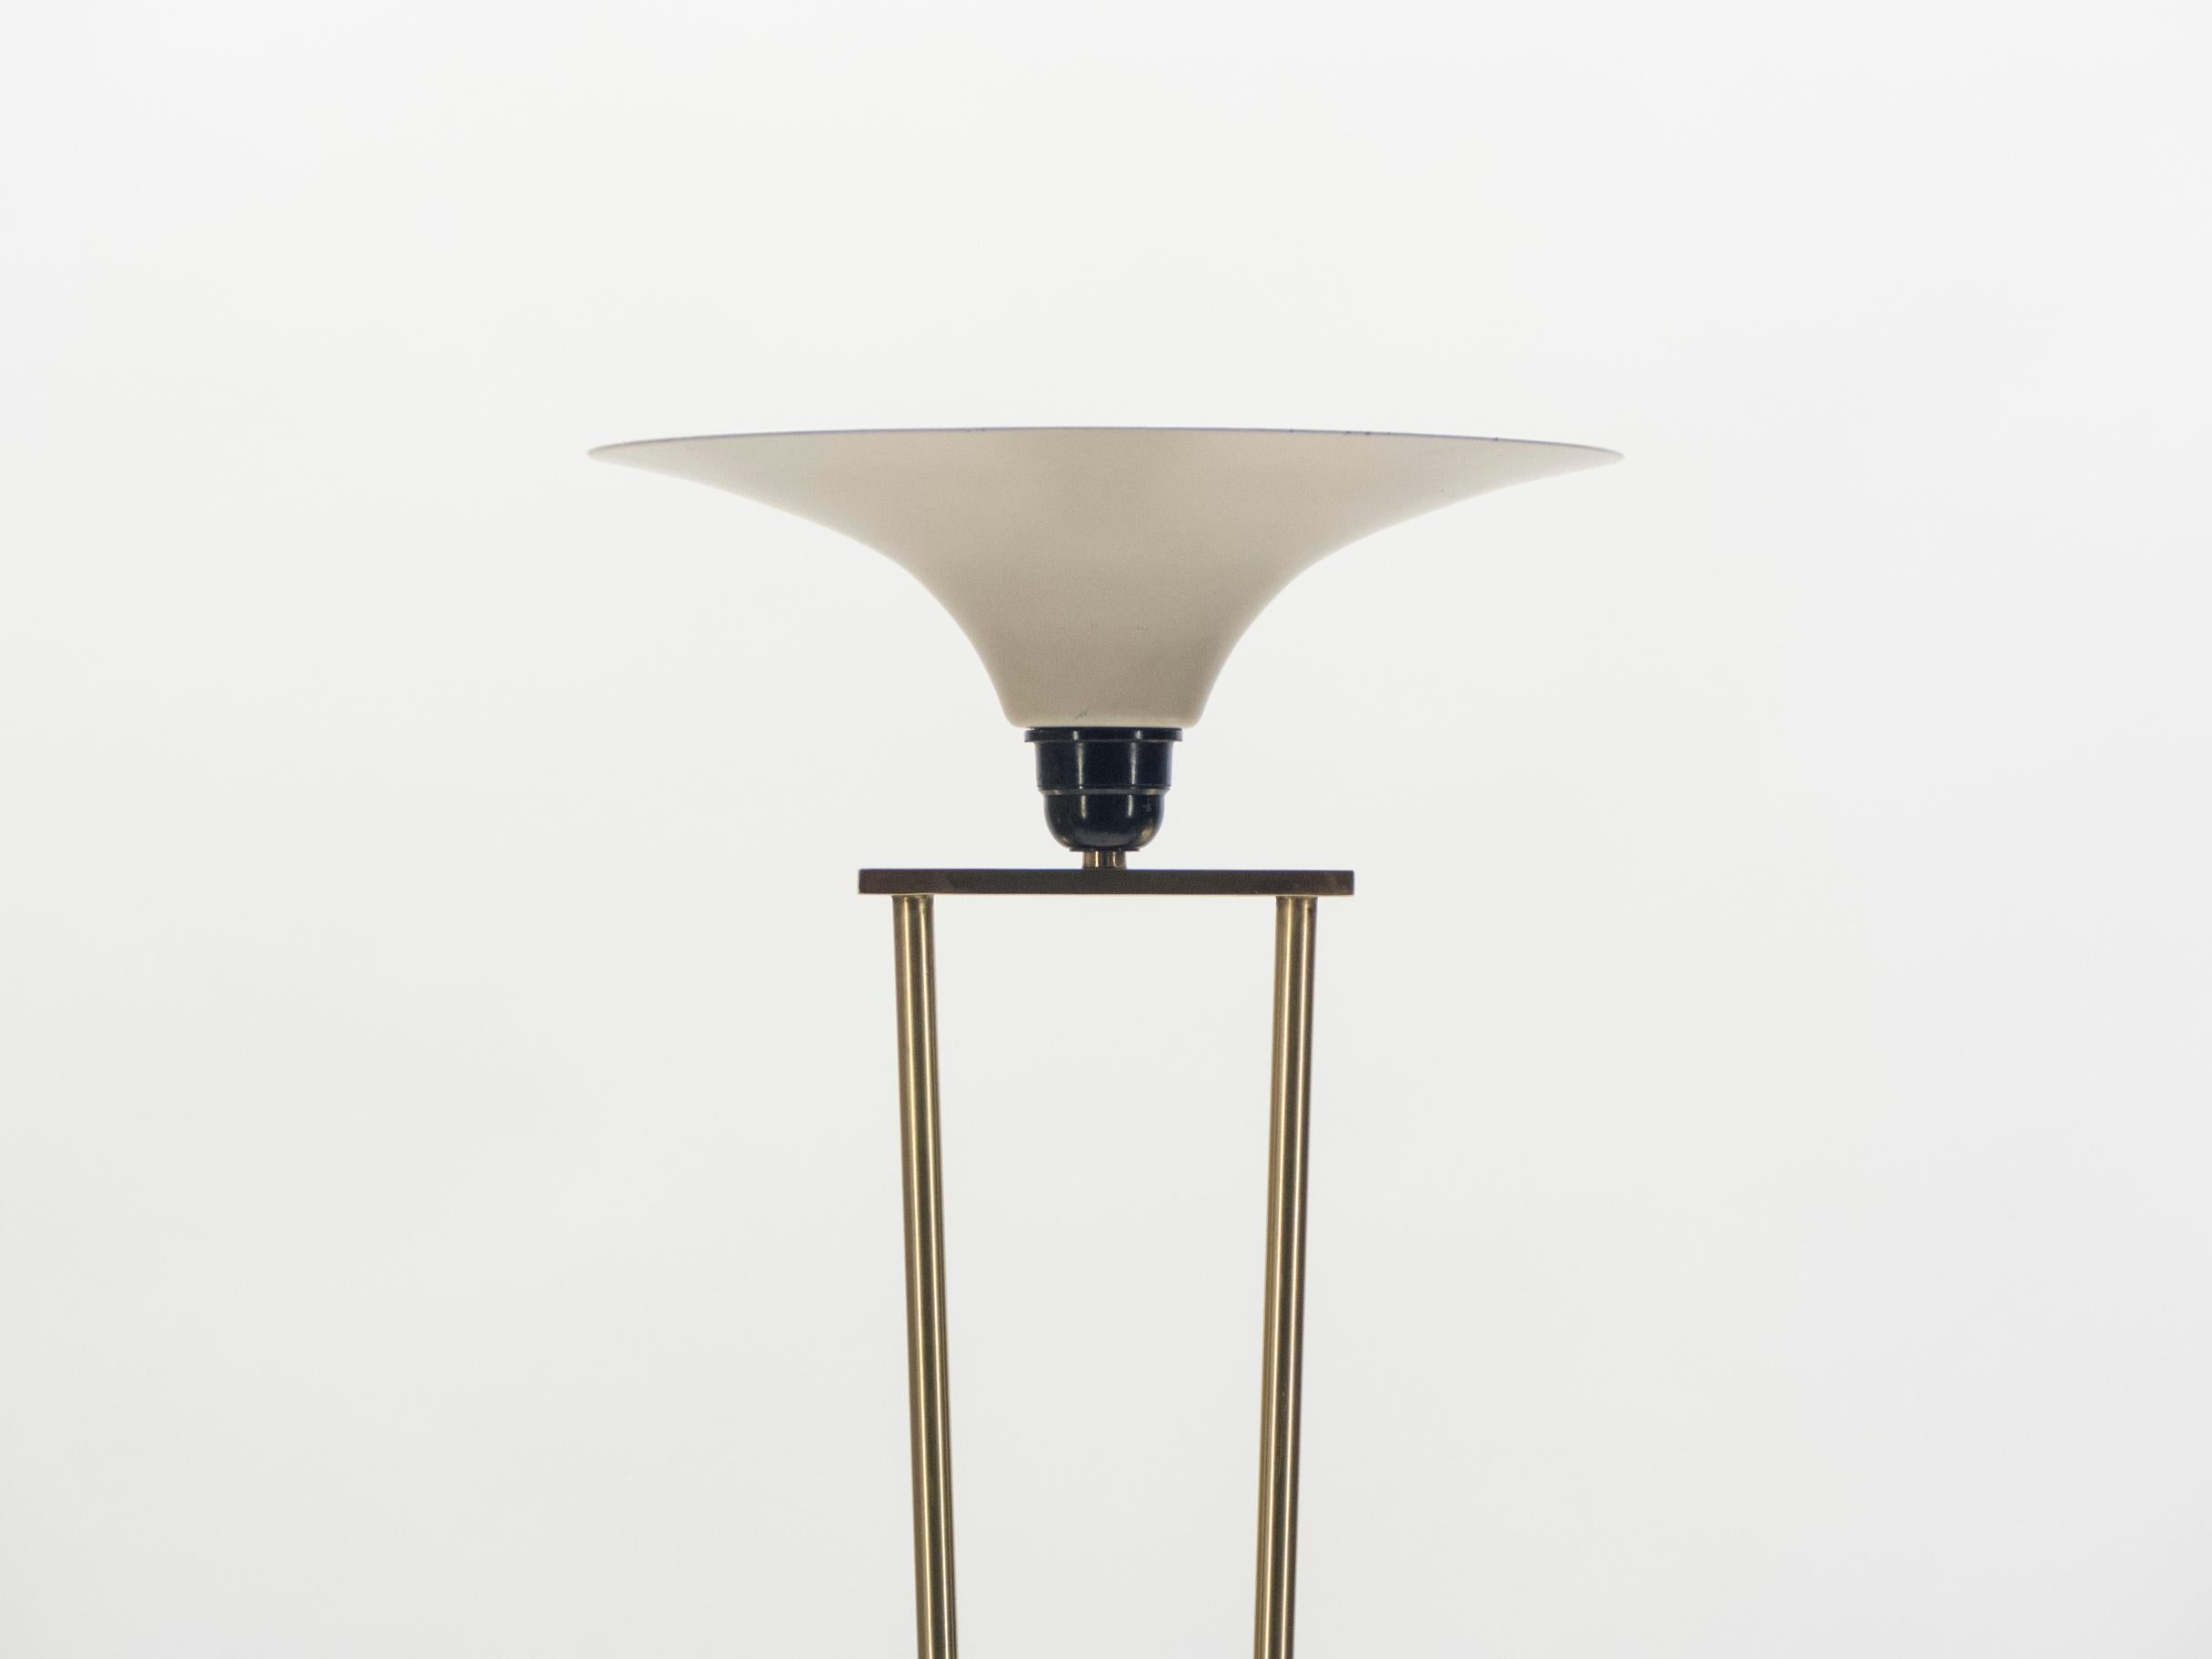 Tall brass legs curve gently into the gorgeous marble base of this midcentury 1960s floor lamp. The lamp covering is made of a milky opaline and has a chic, fluted shape. The overall effect is instantly charming. The high-quality piece is attributed